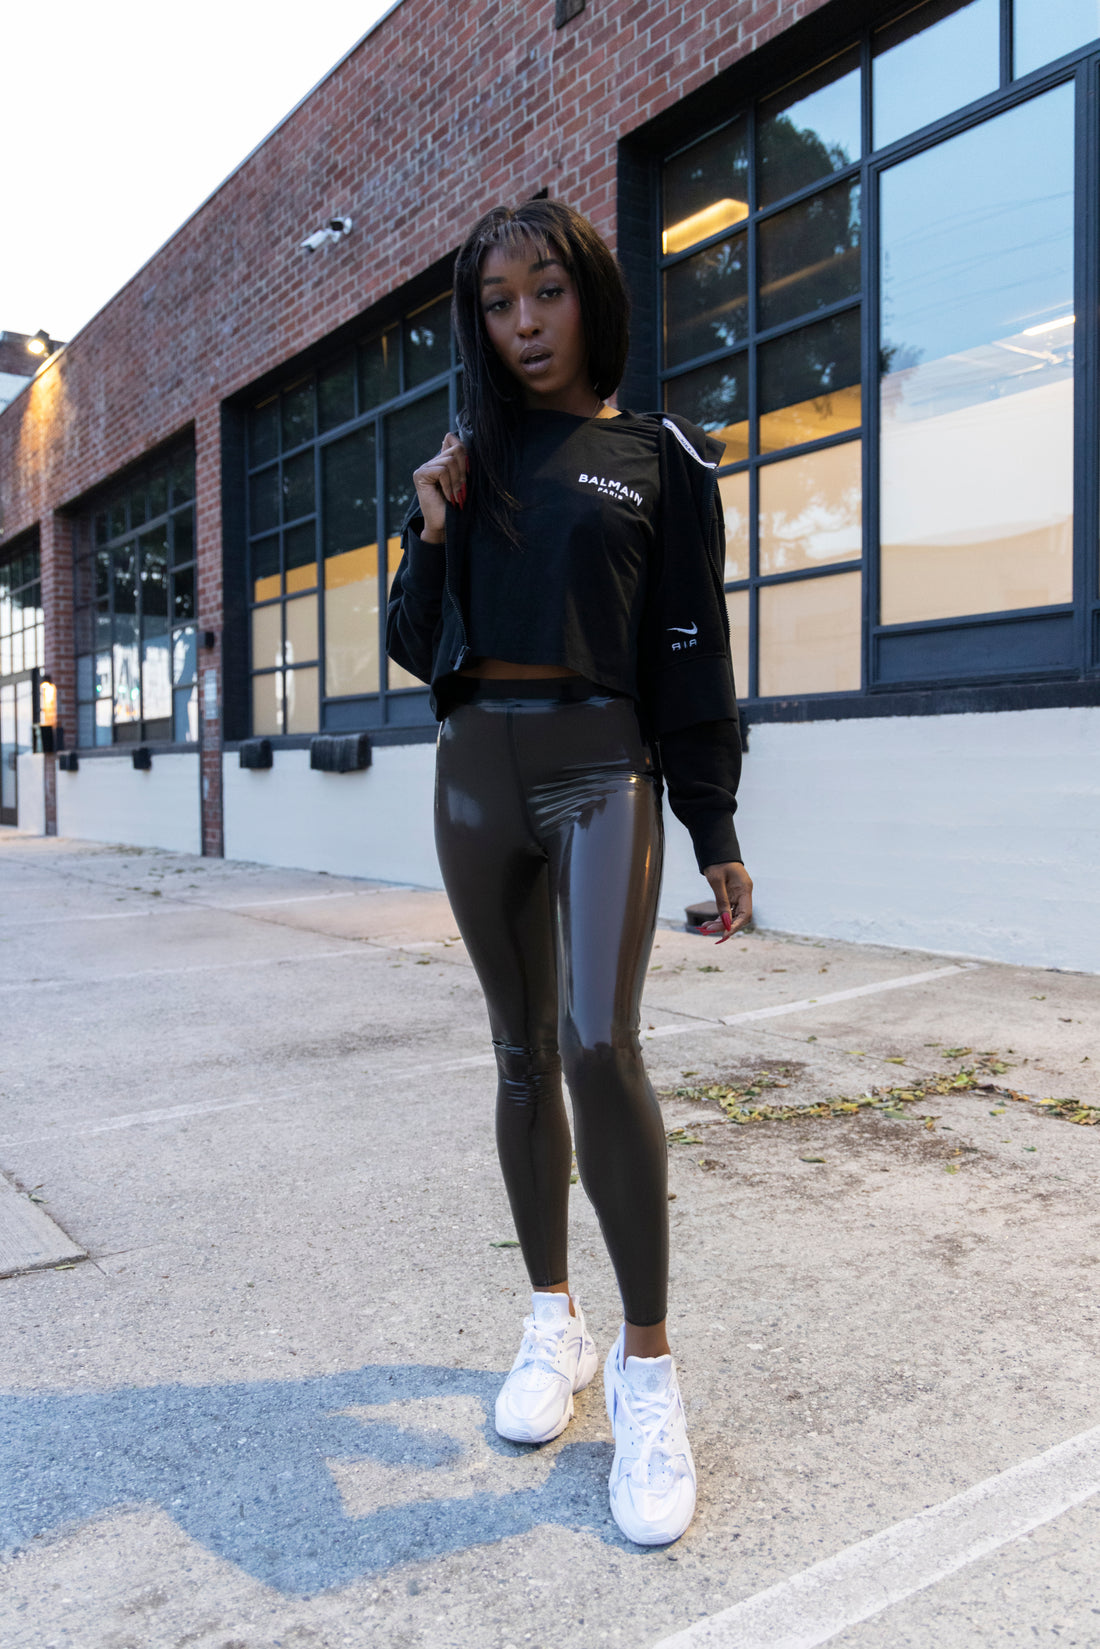 Jheanelle Corine showing her long sexy legs in her transparent latex leggings